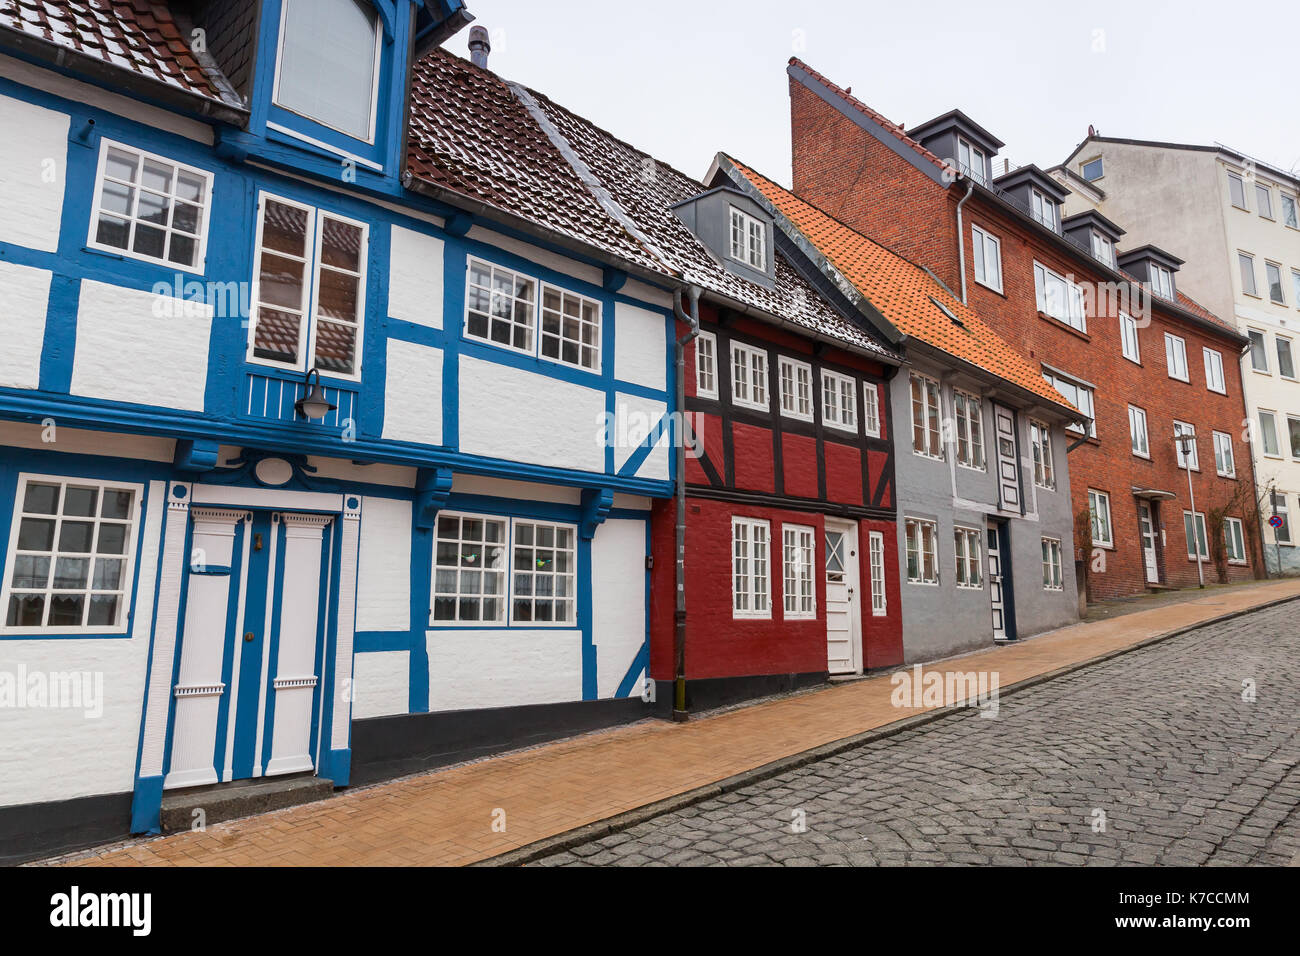 Street view perspective with traditional colorful living houses. Flensburg city, Germany Stock Photo